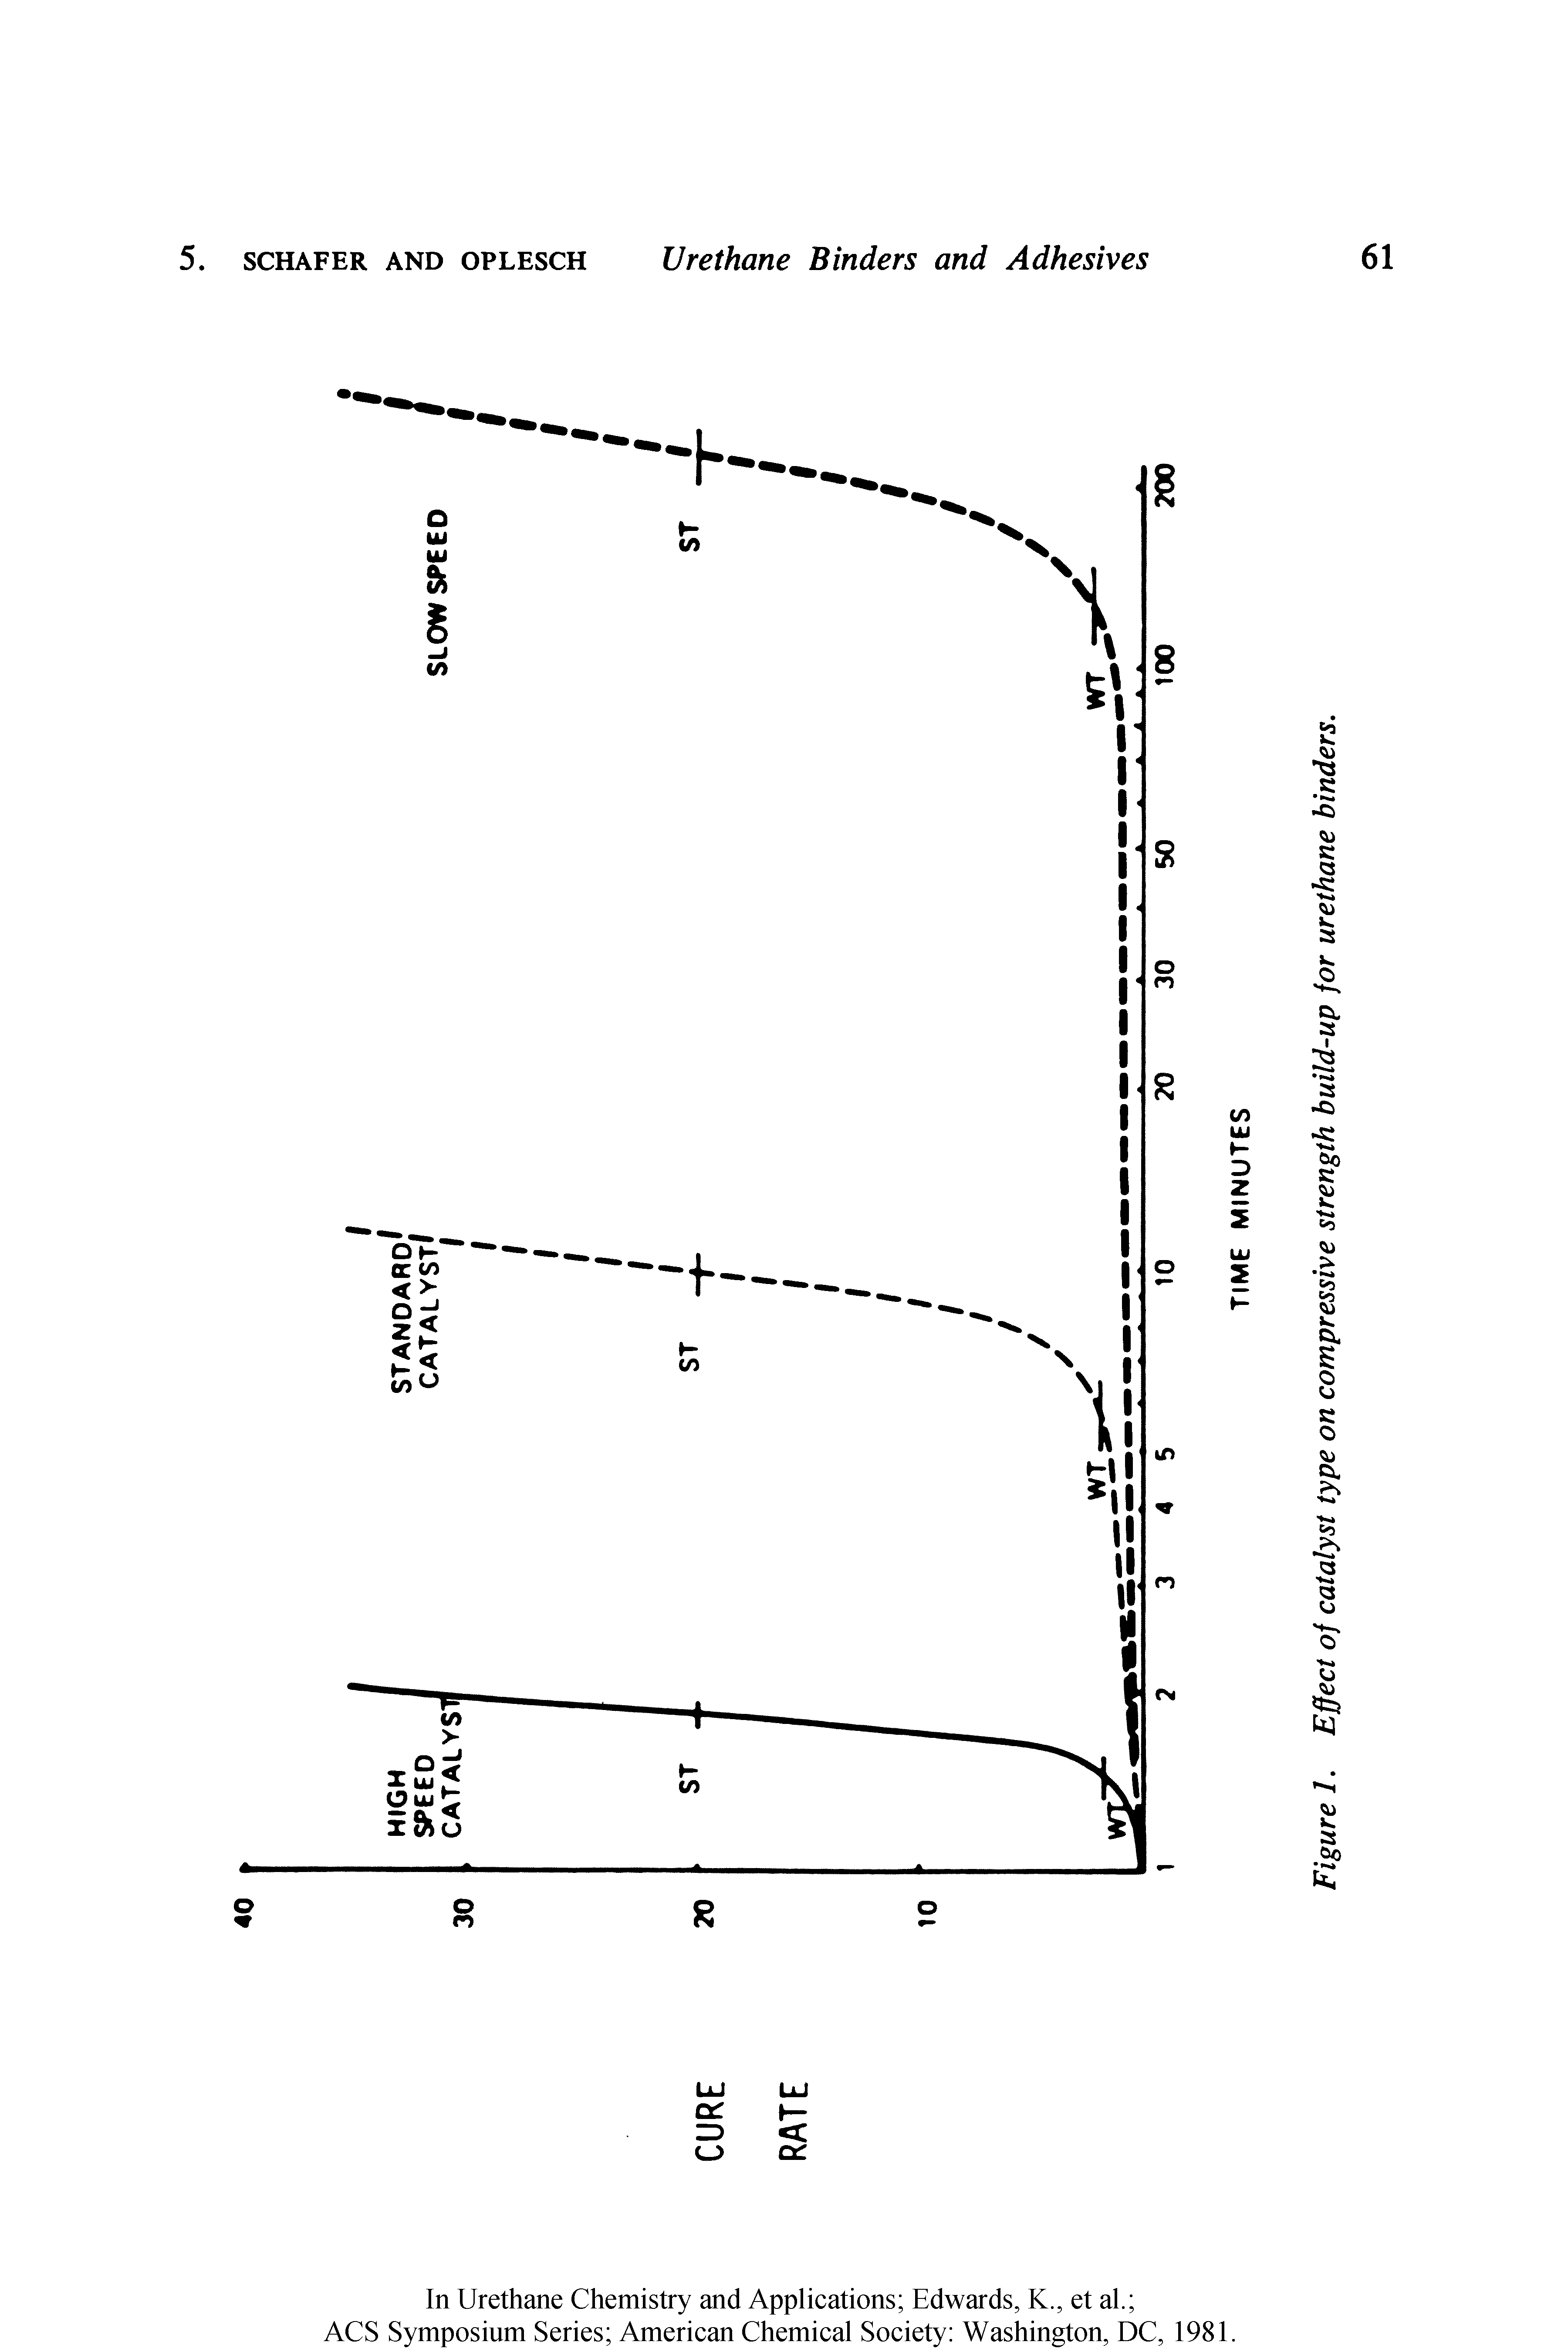 Figure 1. Effect of catalyst type on compressive strength build-up for urethane binders.